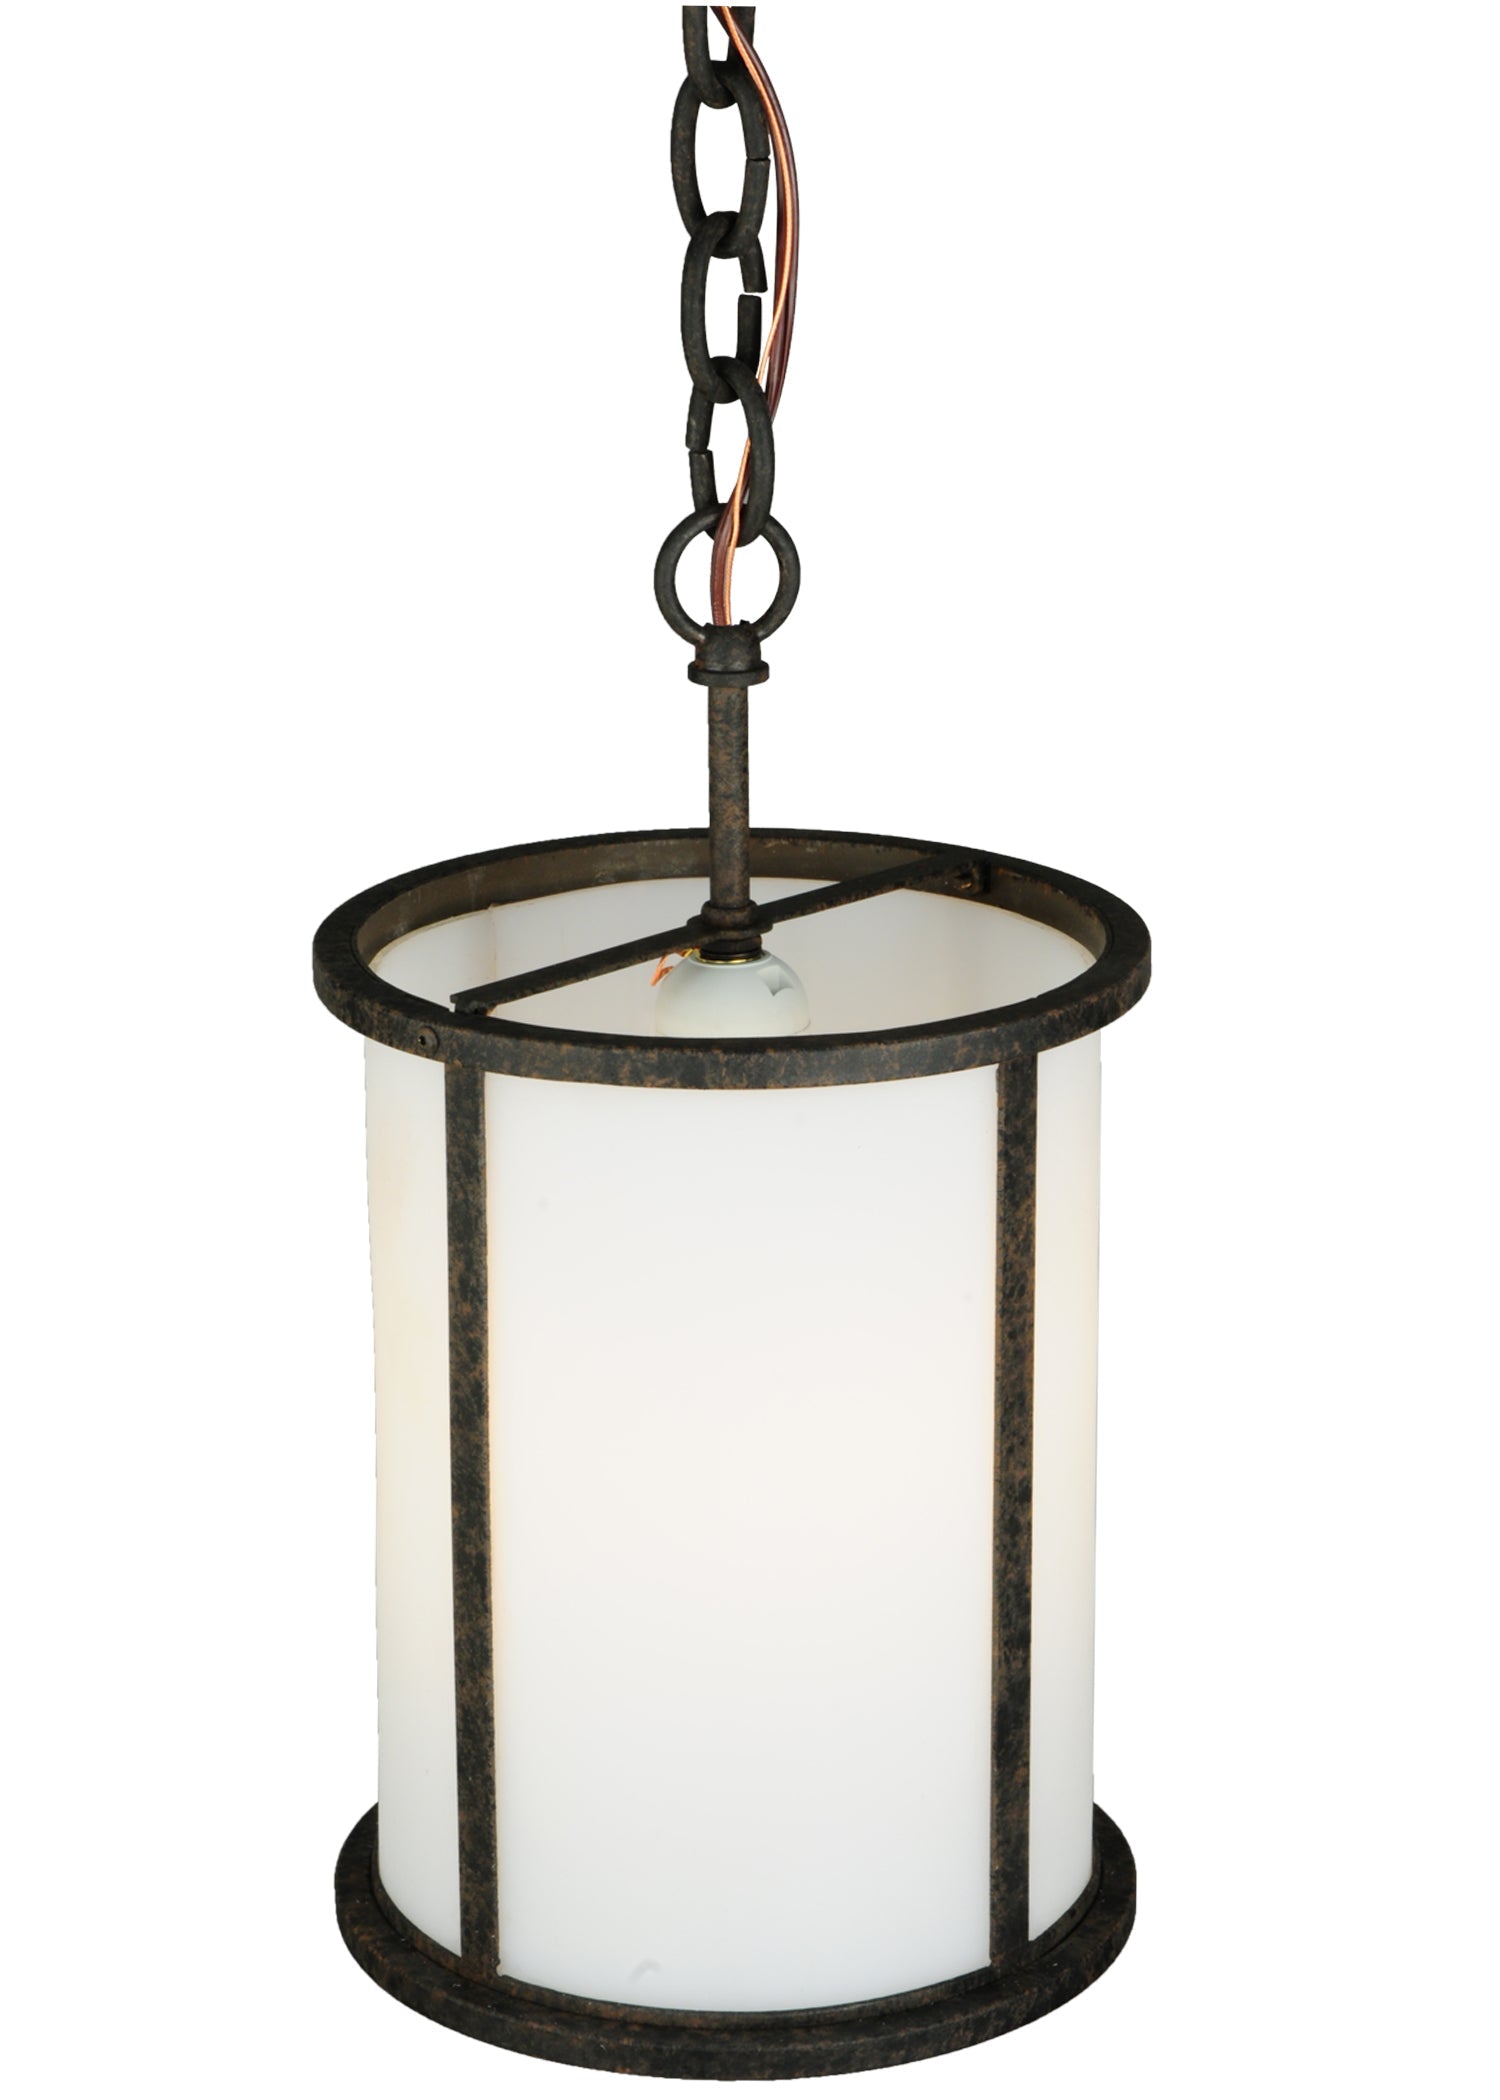 8" Clarabella Pendant by 2nd Ave Lighting